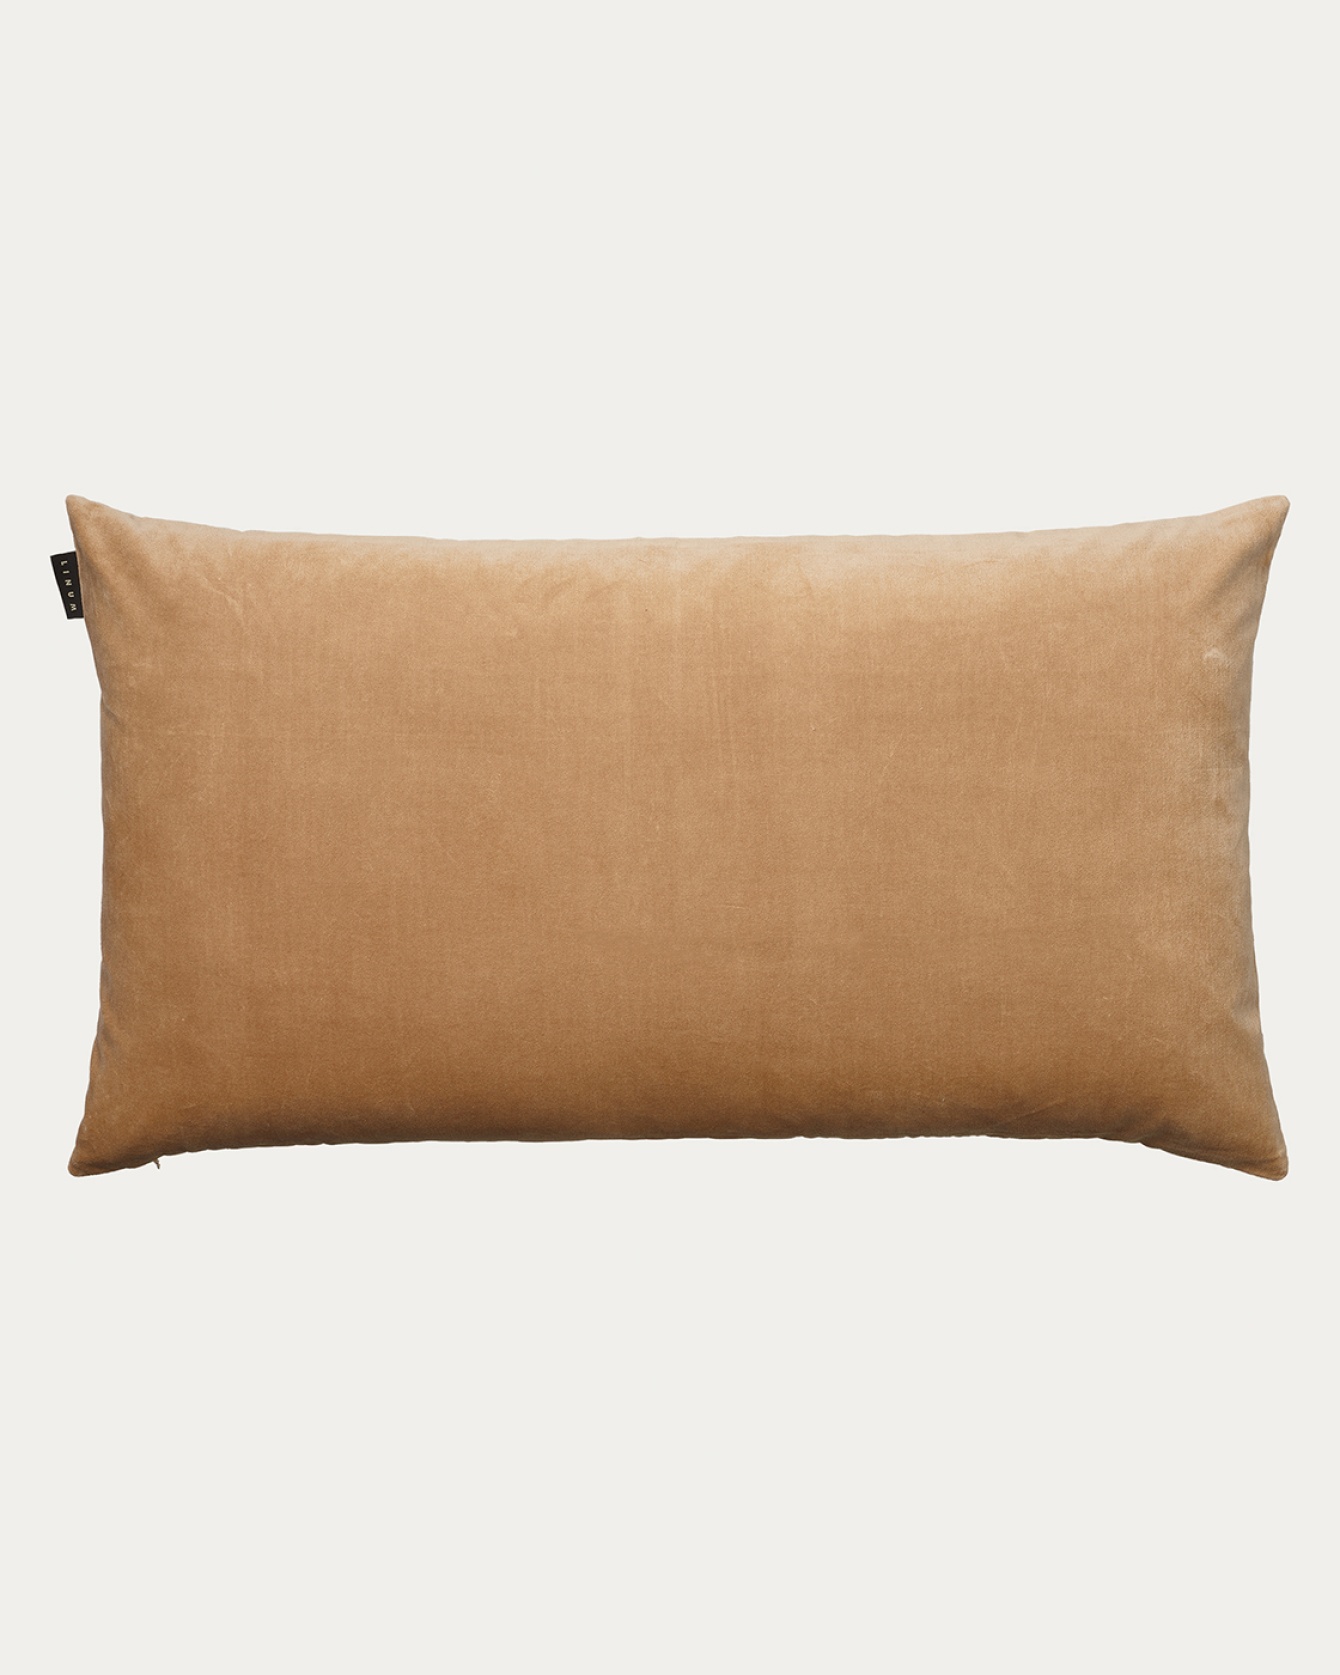 Product image camel brown PAOLO cushion cover made of soft cotton velvet and 100% linen from LINUM DESIGN. Size 50x90 cm.